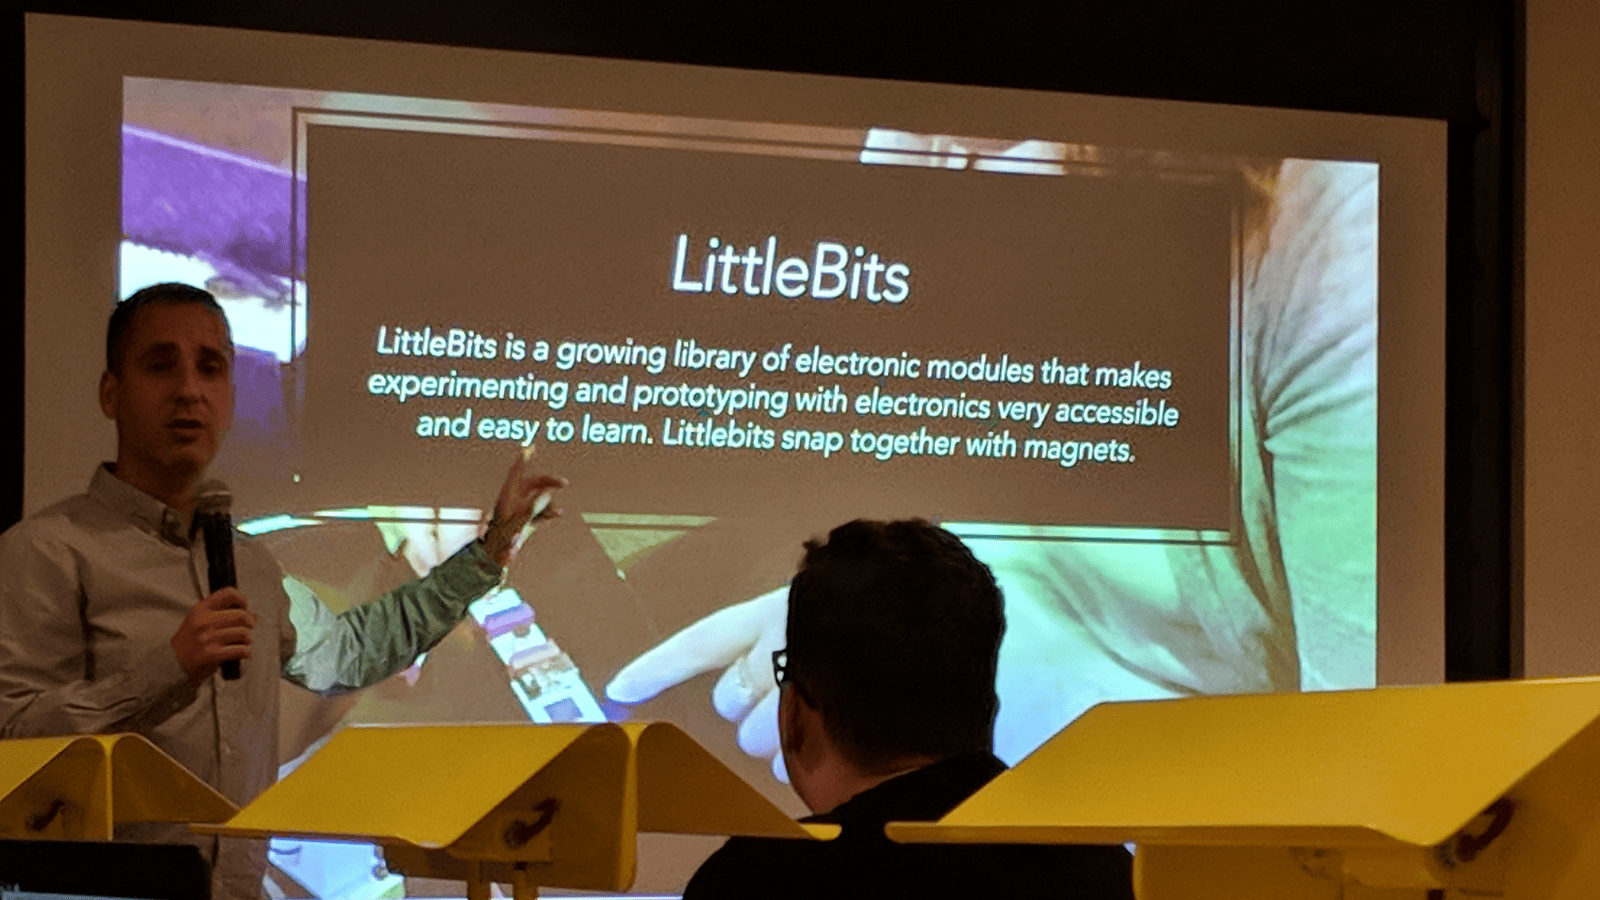 Chakib explaining LittleBits to the audience at UX Playground at WeWork London.